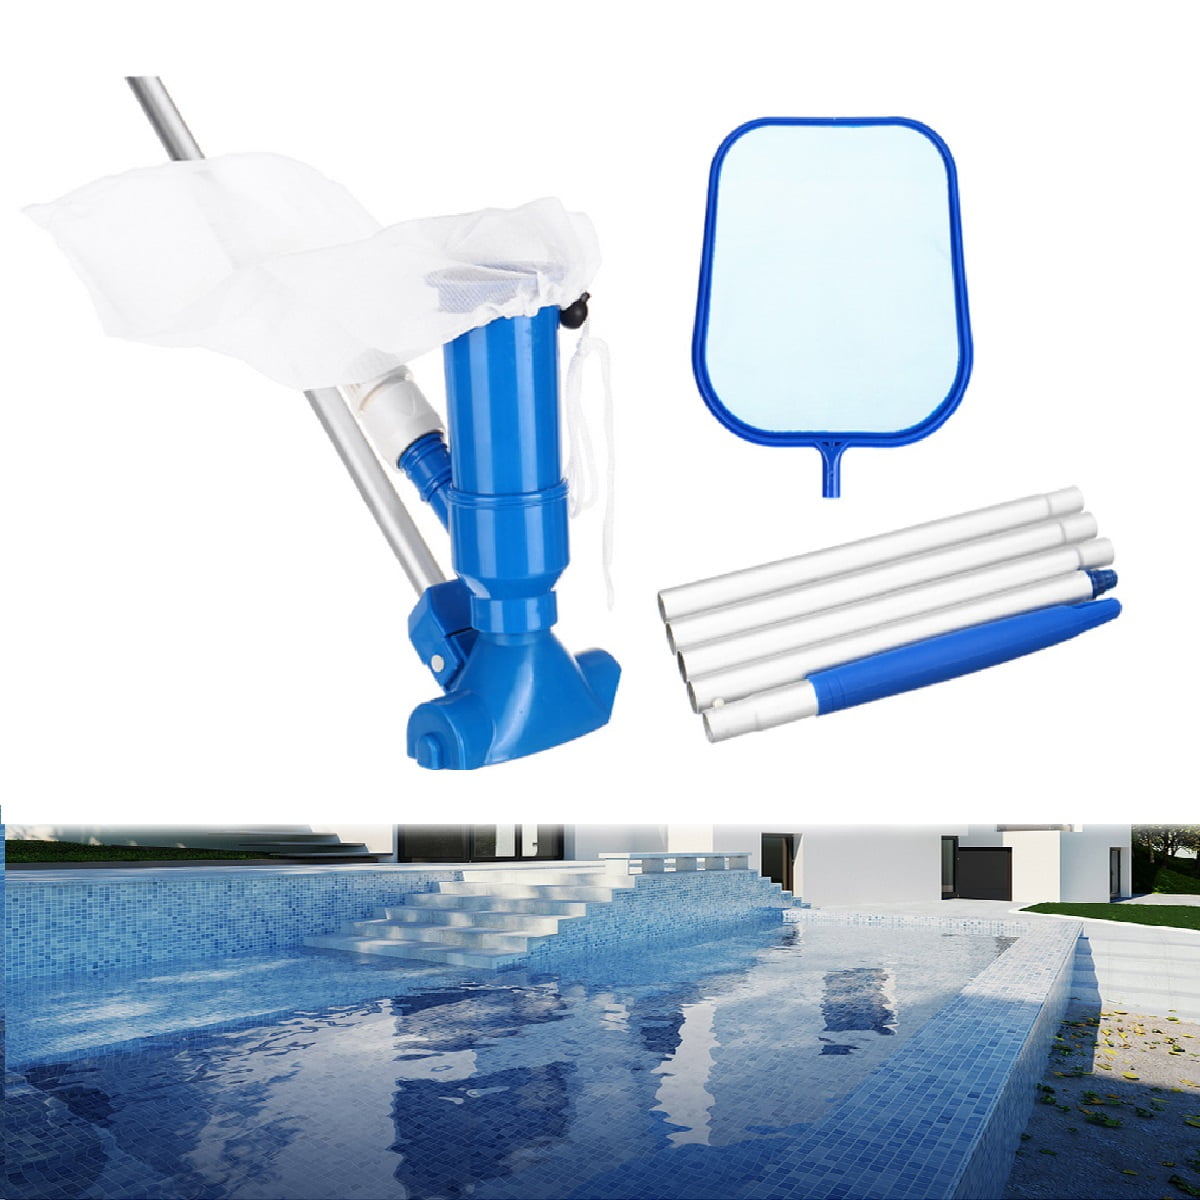 Swimming Pool Leaf Vacuum,Swimming Pool Cleaning Tools,Jet Vac Vacuum Cleaner,Suck Leaf Vacuum, for above ground pool,spas and fountains